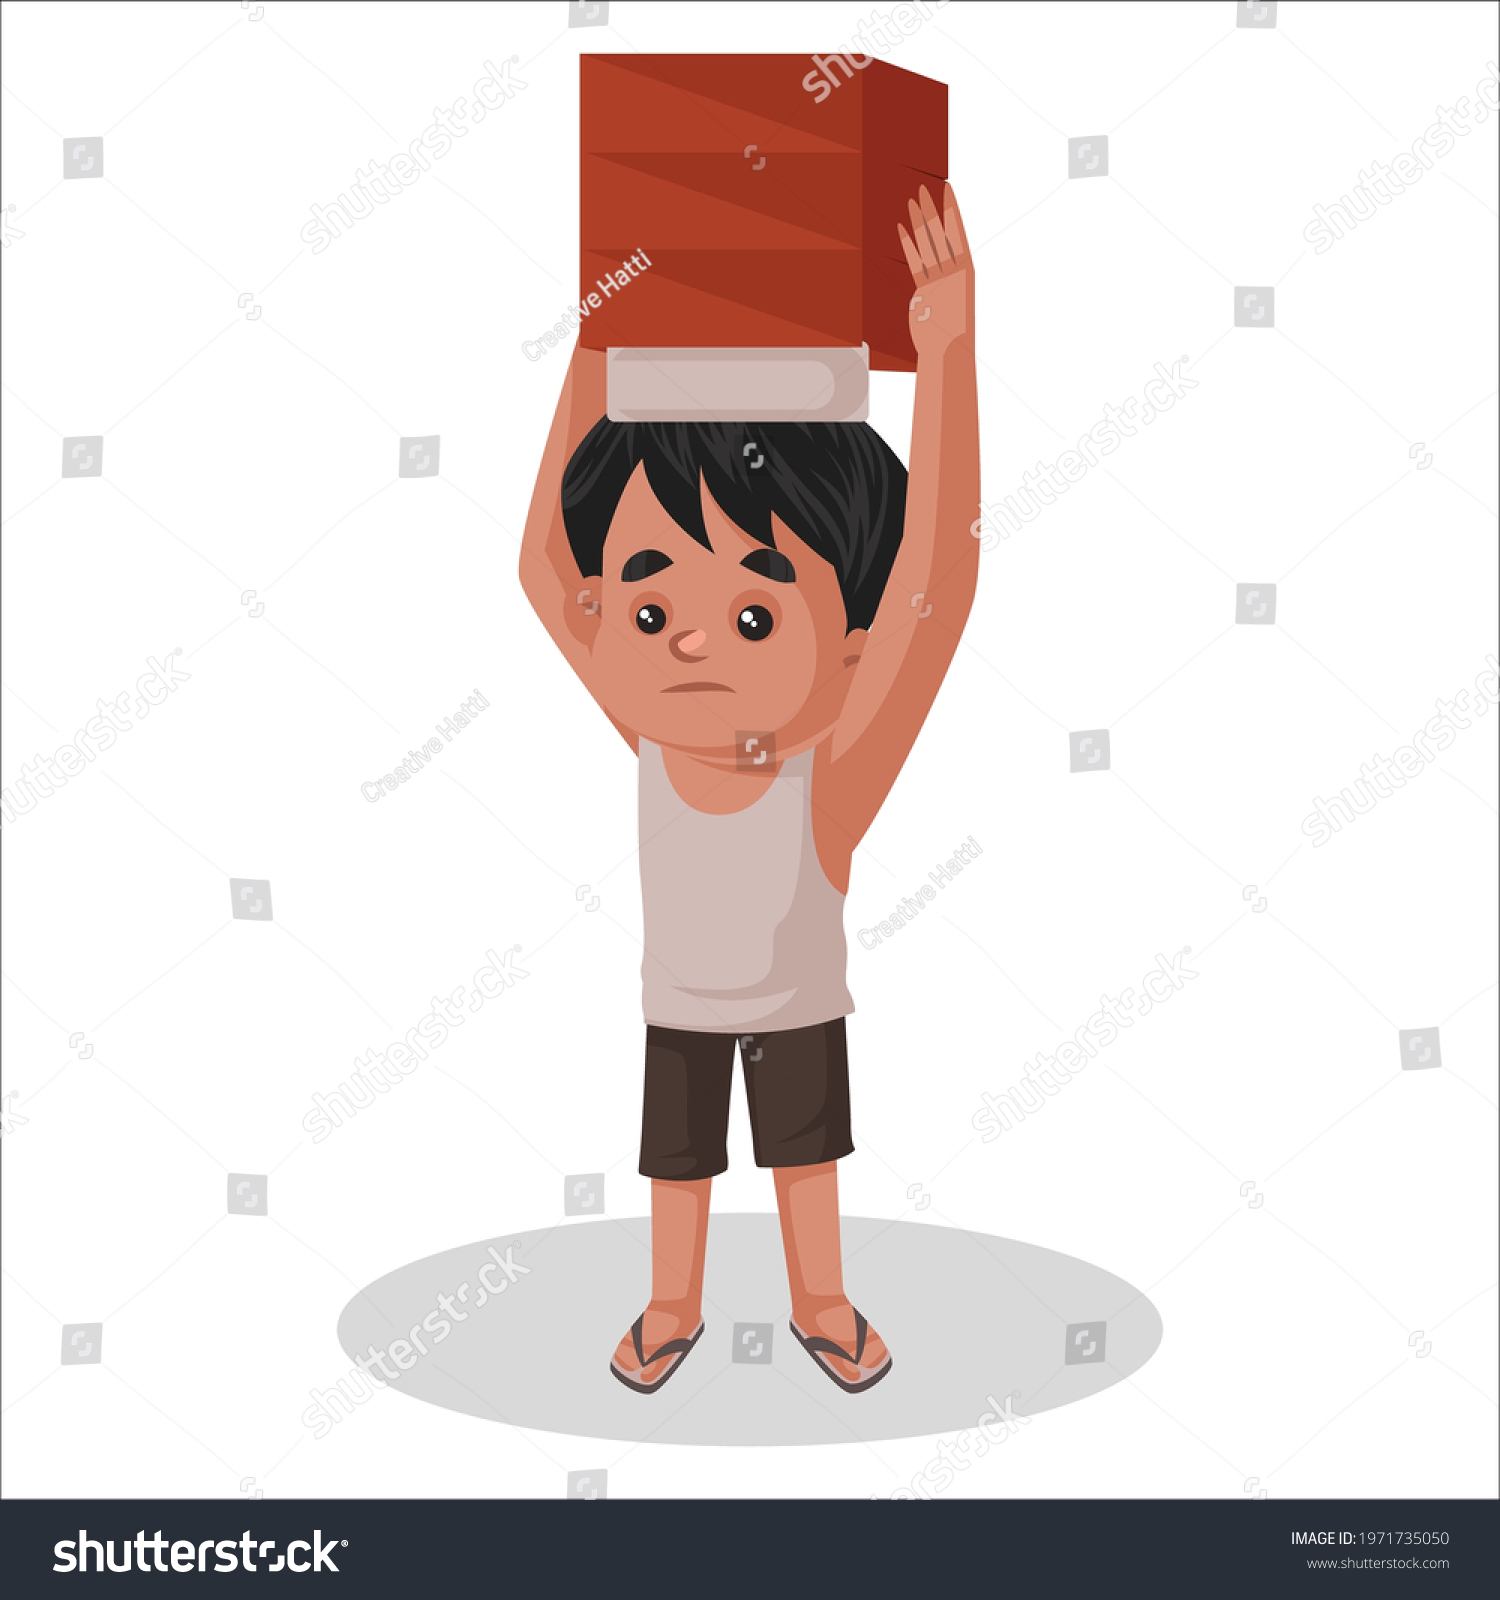 SVG of Boy is holding bricks on his head. Vector graphic illustration. Individually on a white background. svg